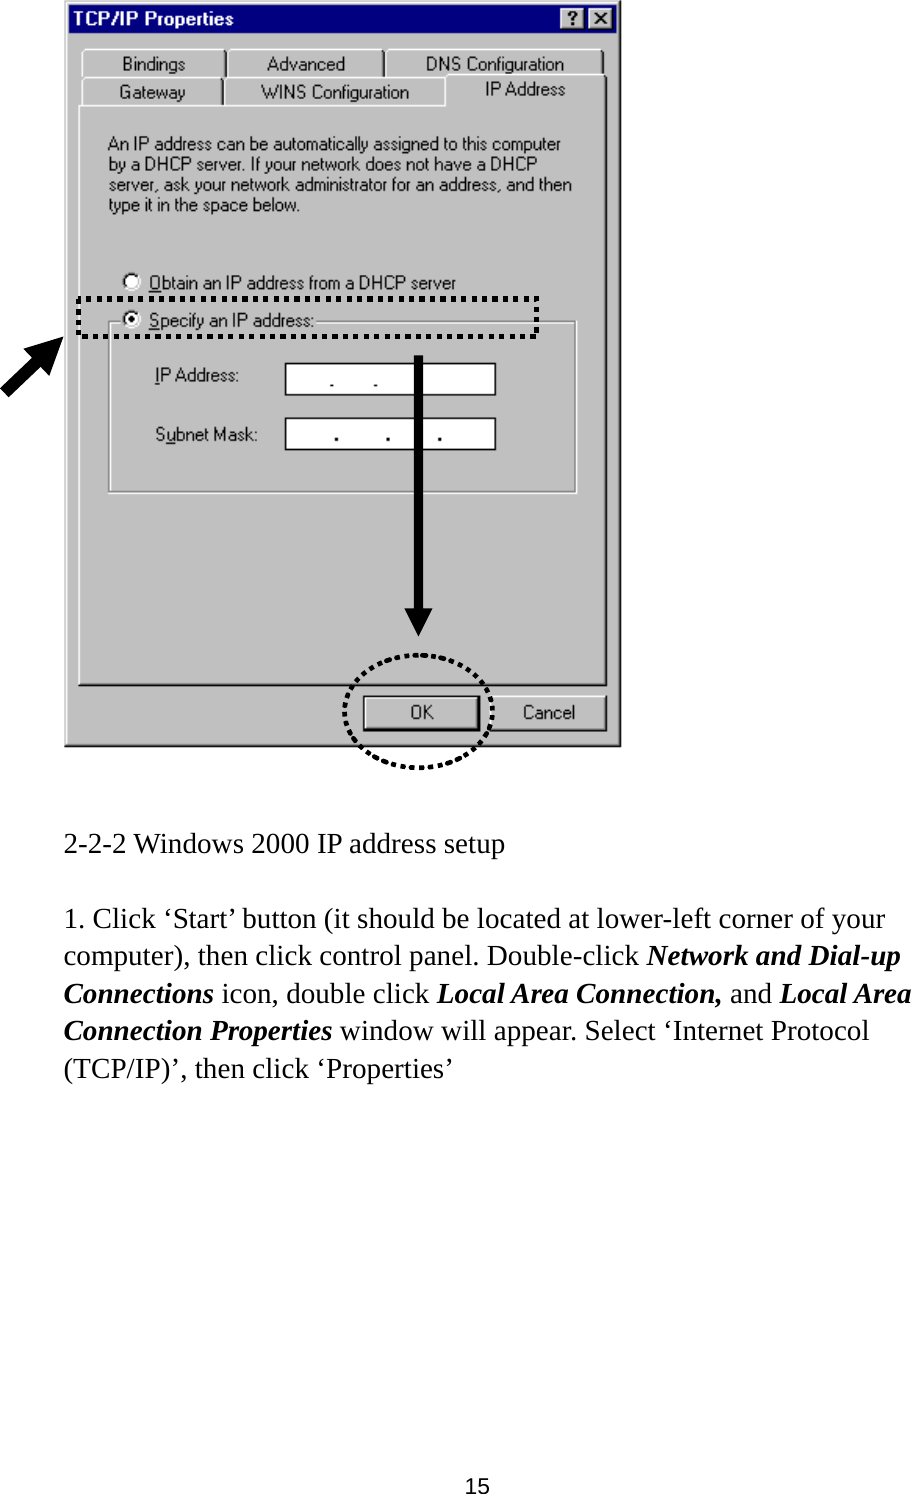 15    2-2-2 Windows 2000 IP address setup  1. Click ‘Start’ button (it should be located at lower-left corner of your computer), then click control panel. Double-click Network and Dial-up Connections icon, double click Local Area Connection, and Local Area Connection Properties window will appear. Select ‘Internet Protocol (TCP/IP)’, then click ‘Properties’    